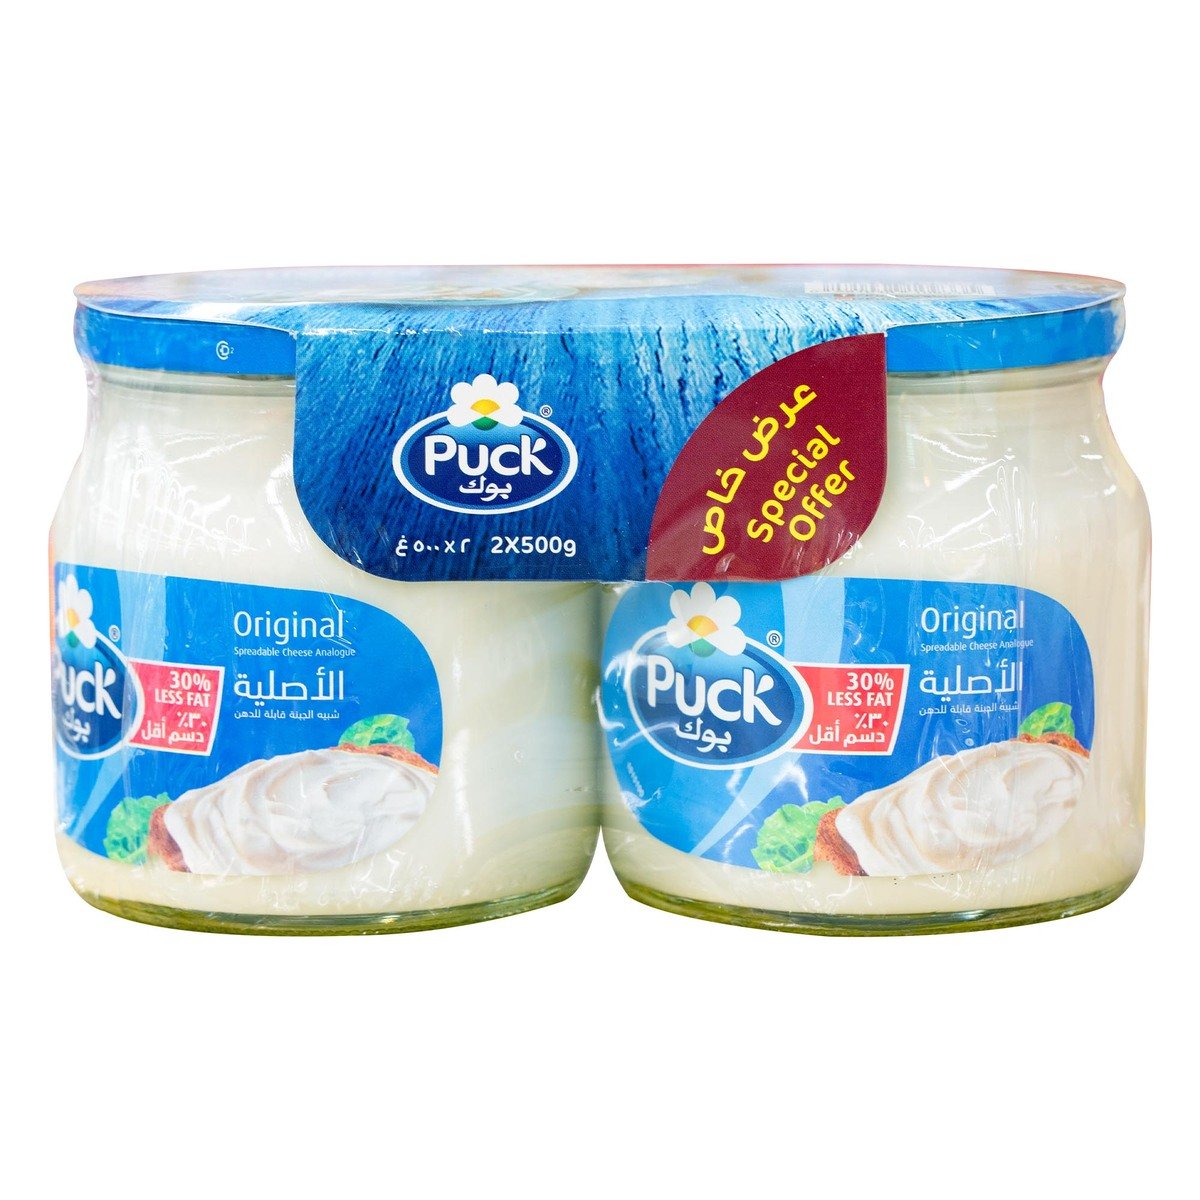 Buy Puck Spreadable Cheese Analogue Low Fat Value Pack 2 x 500g Online at Best Price | Jar Cheese | Lulu KSA in Saudi Arabia